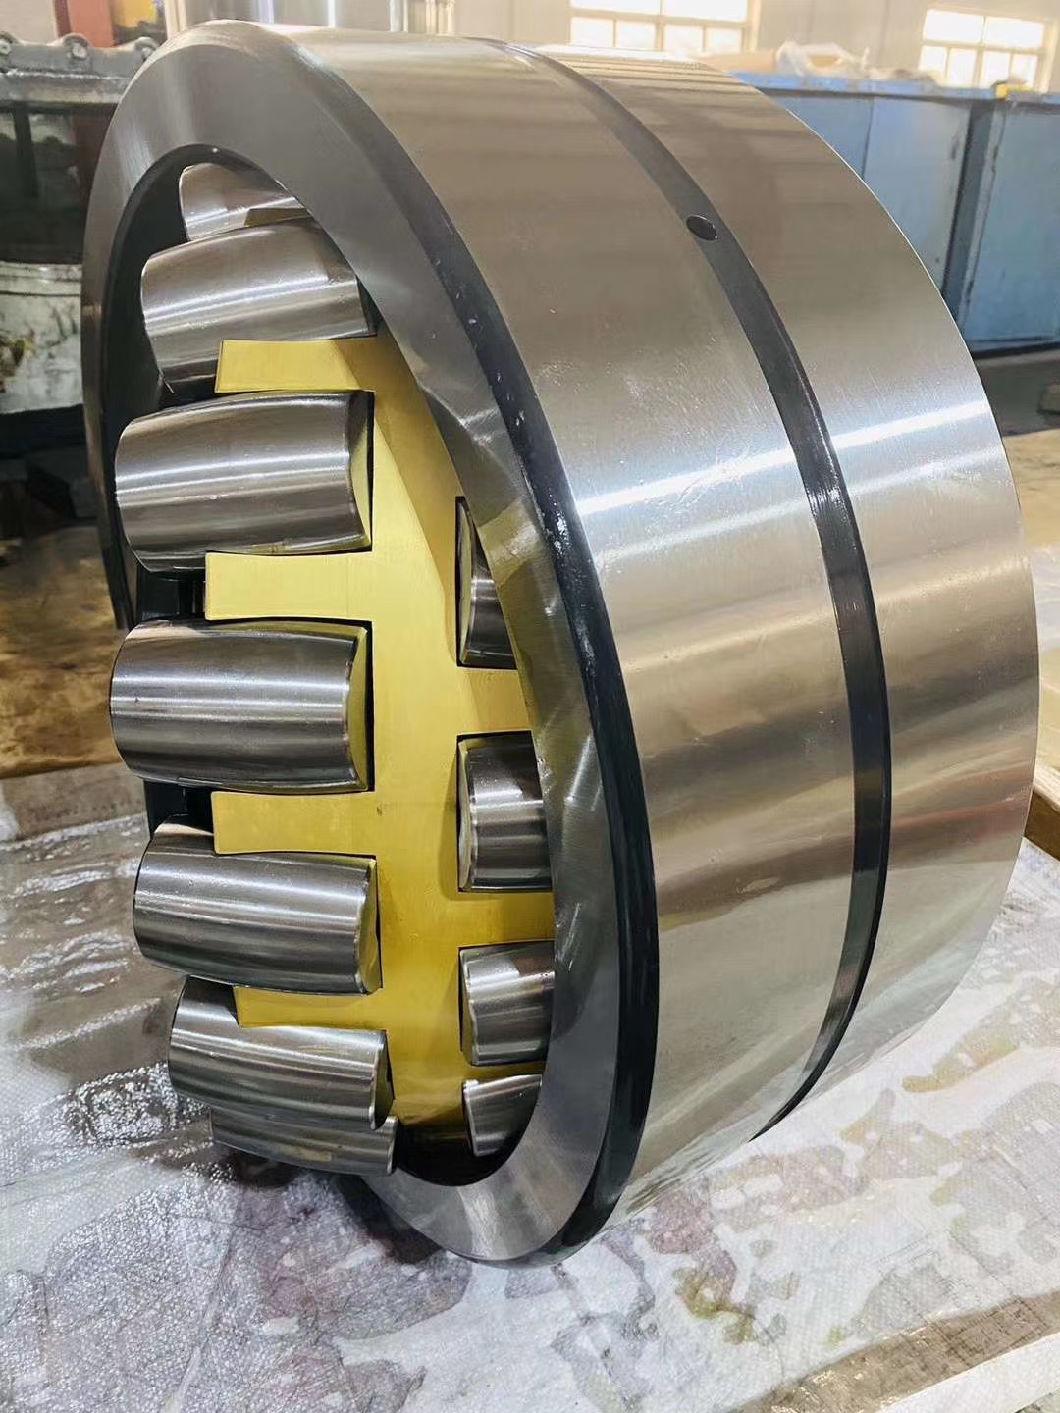 230/1250caf3c3w33 Spherical Roller Bearing for Cement Mixer